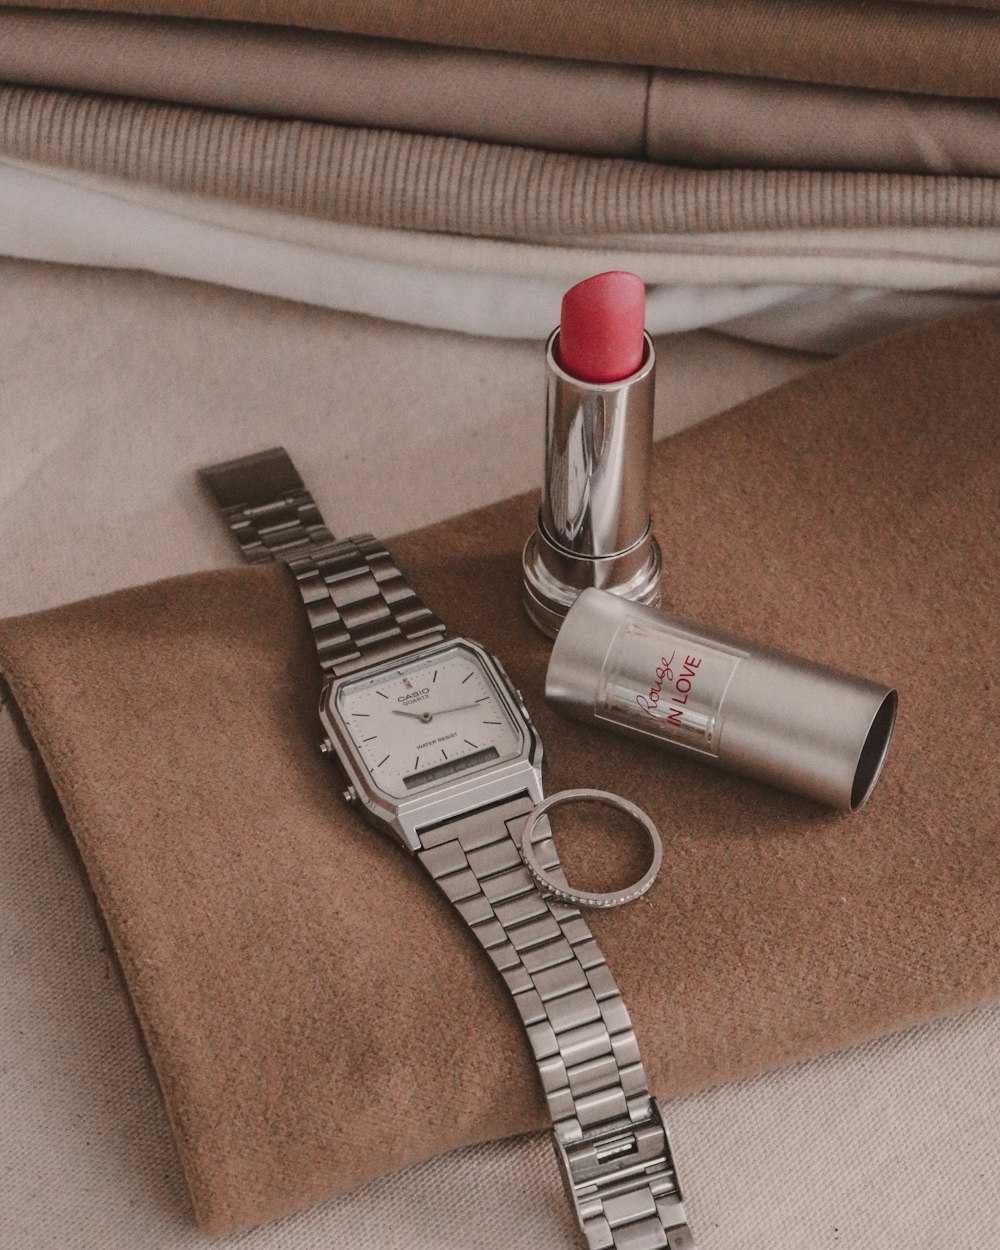 a watch, lipstick and a watch on a bed